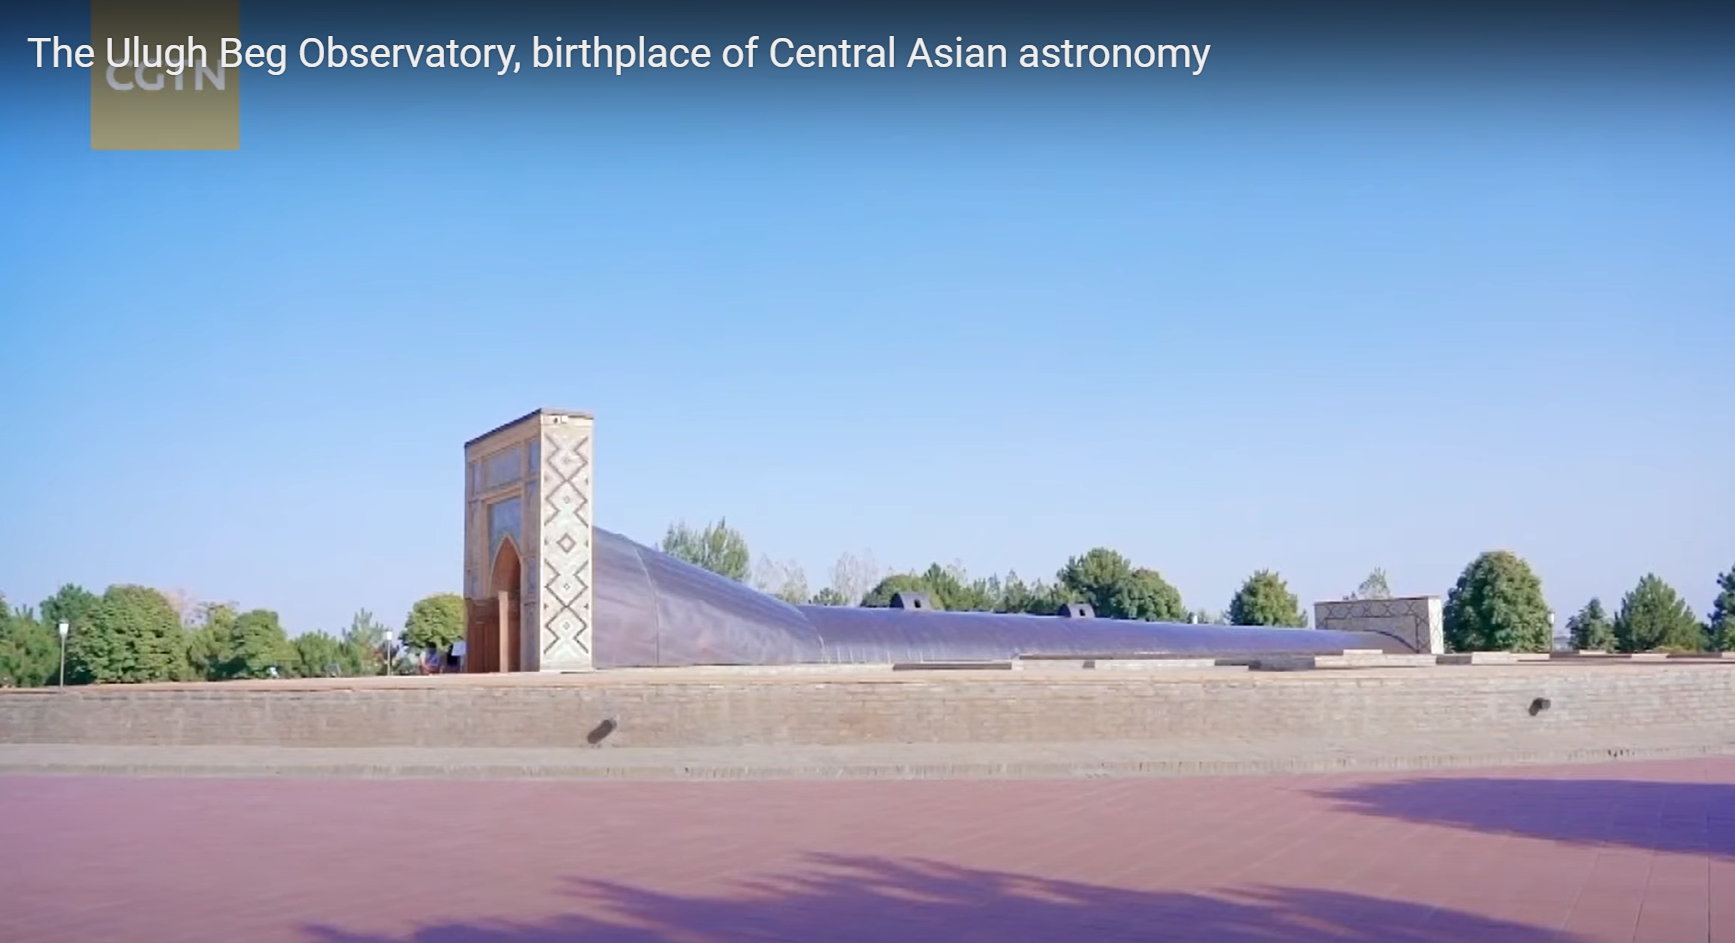 The Ulugh Beg Observatory, birthplace of Central Asian astronomy